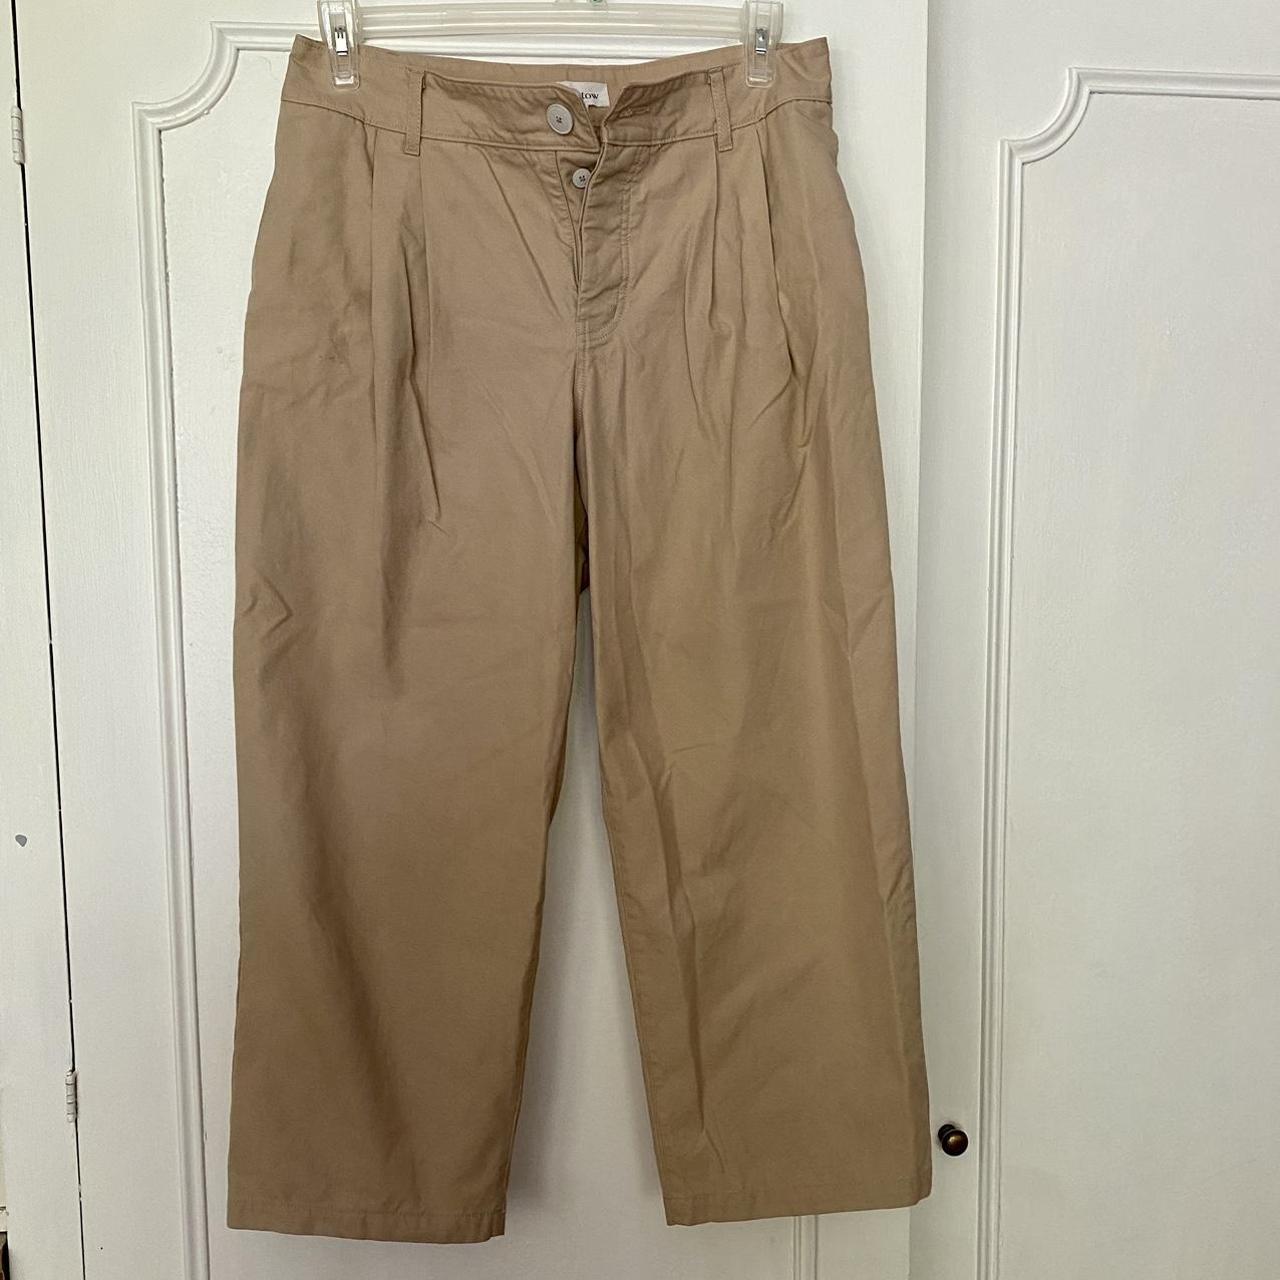 Amour Vert Women's Tan and Cream Trousers (4)